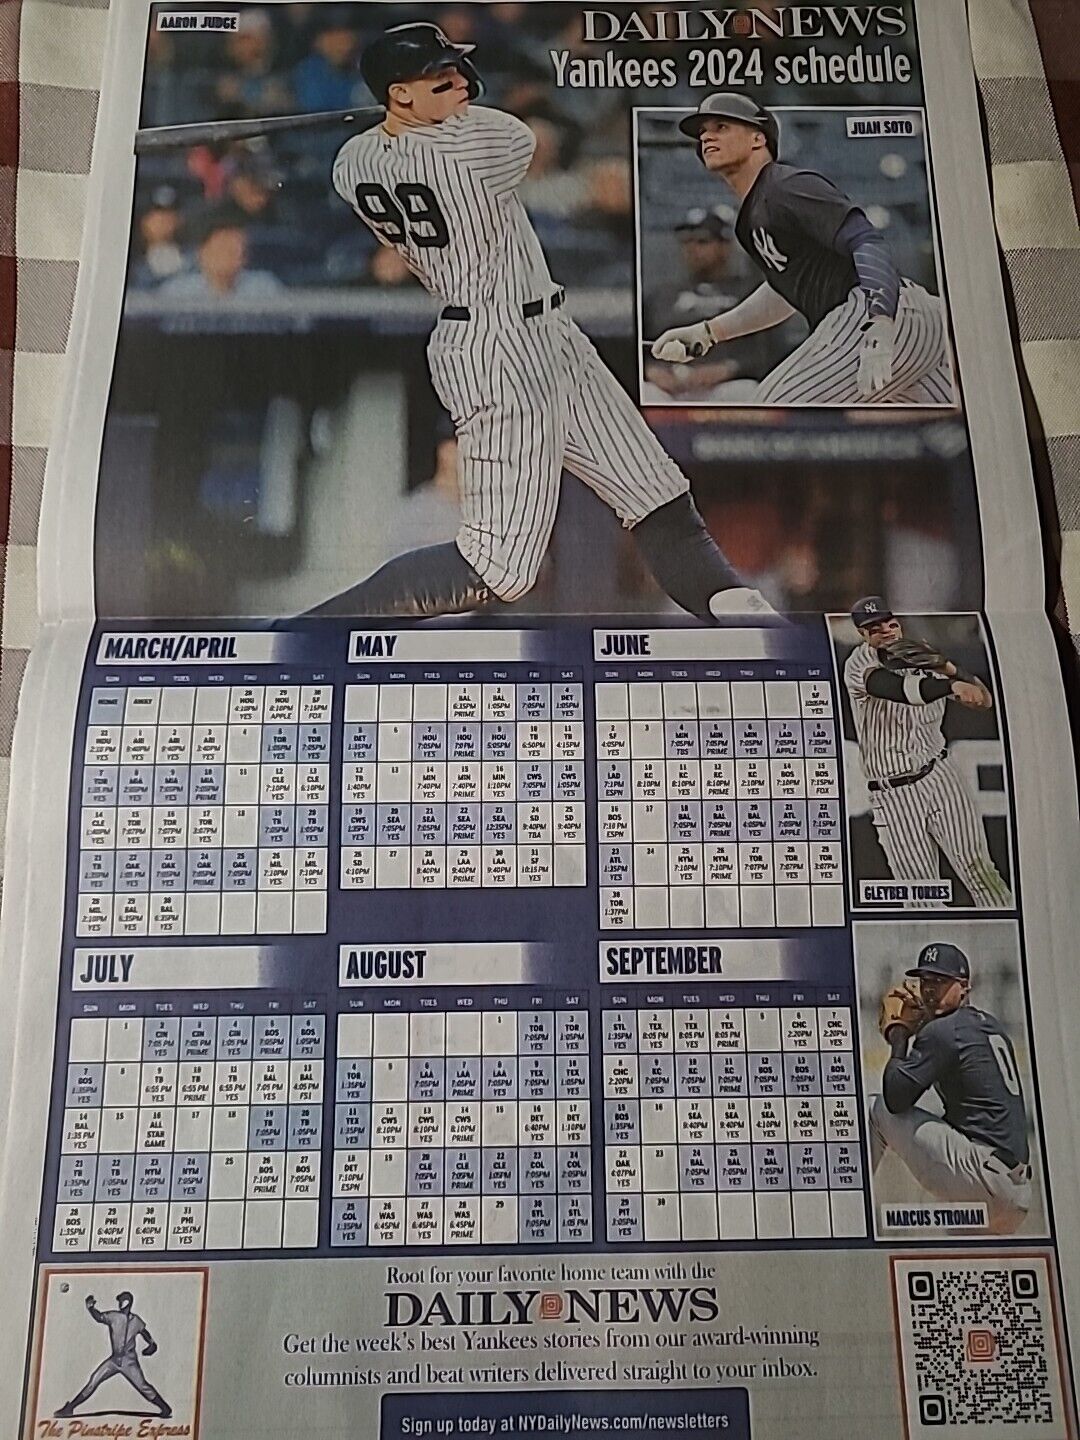 AARON JUDGE JUAN SOTO YANKEES PREVIEW WALL SCHEDULE POSTER NY DAILY NEWS 2024